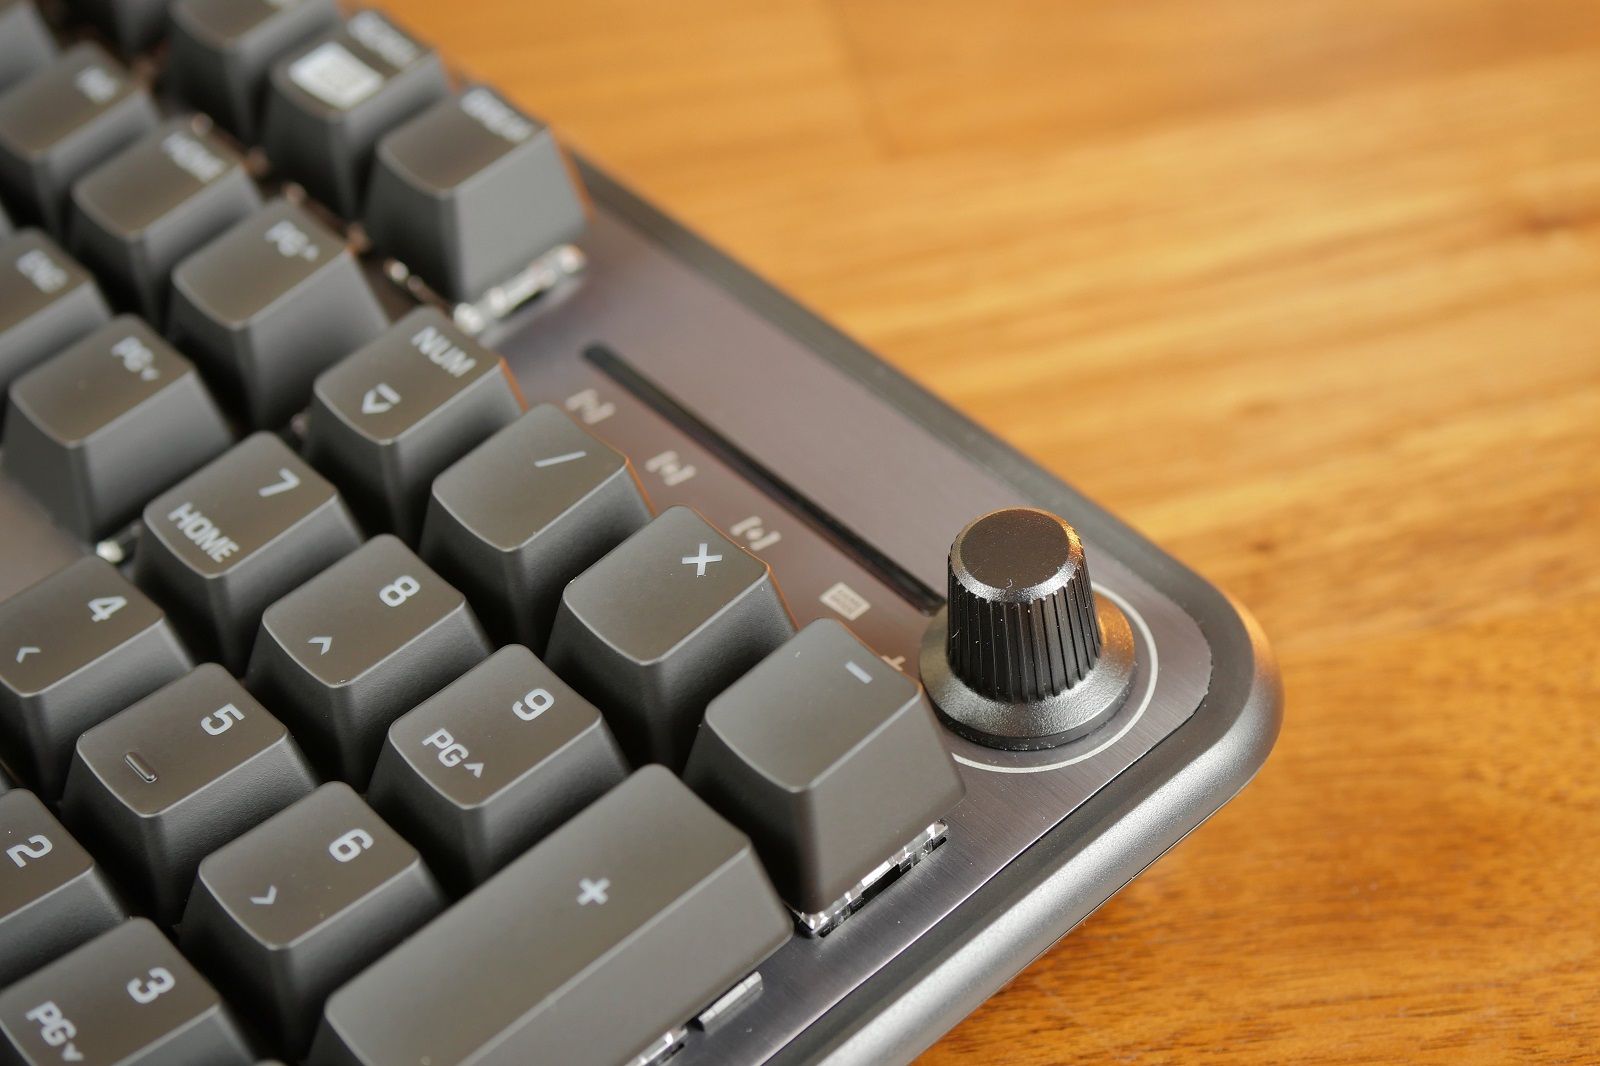 Roccat Pyro gaming keyboard review: An affordable mechanical keyboard with appeal photo 2